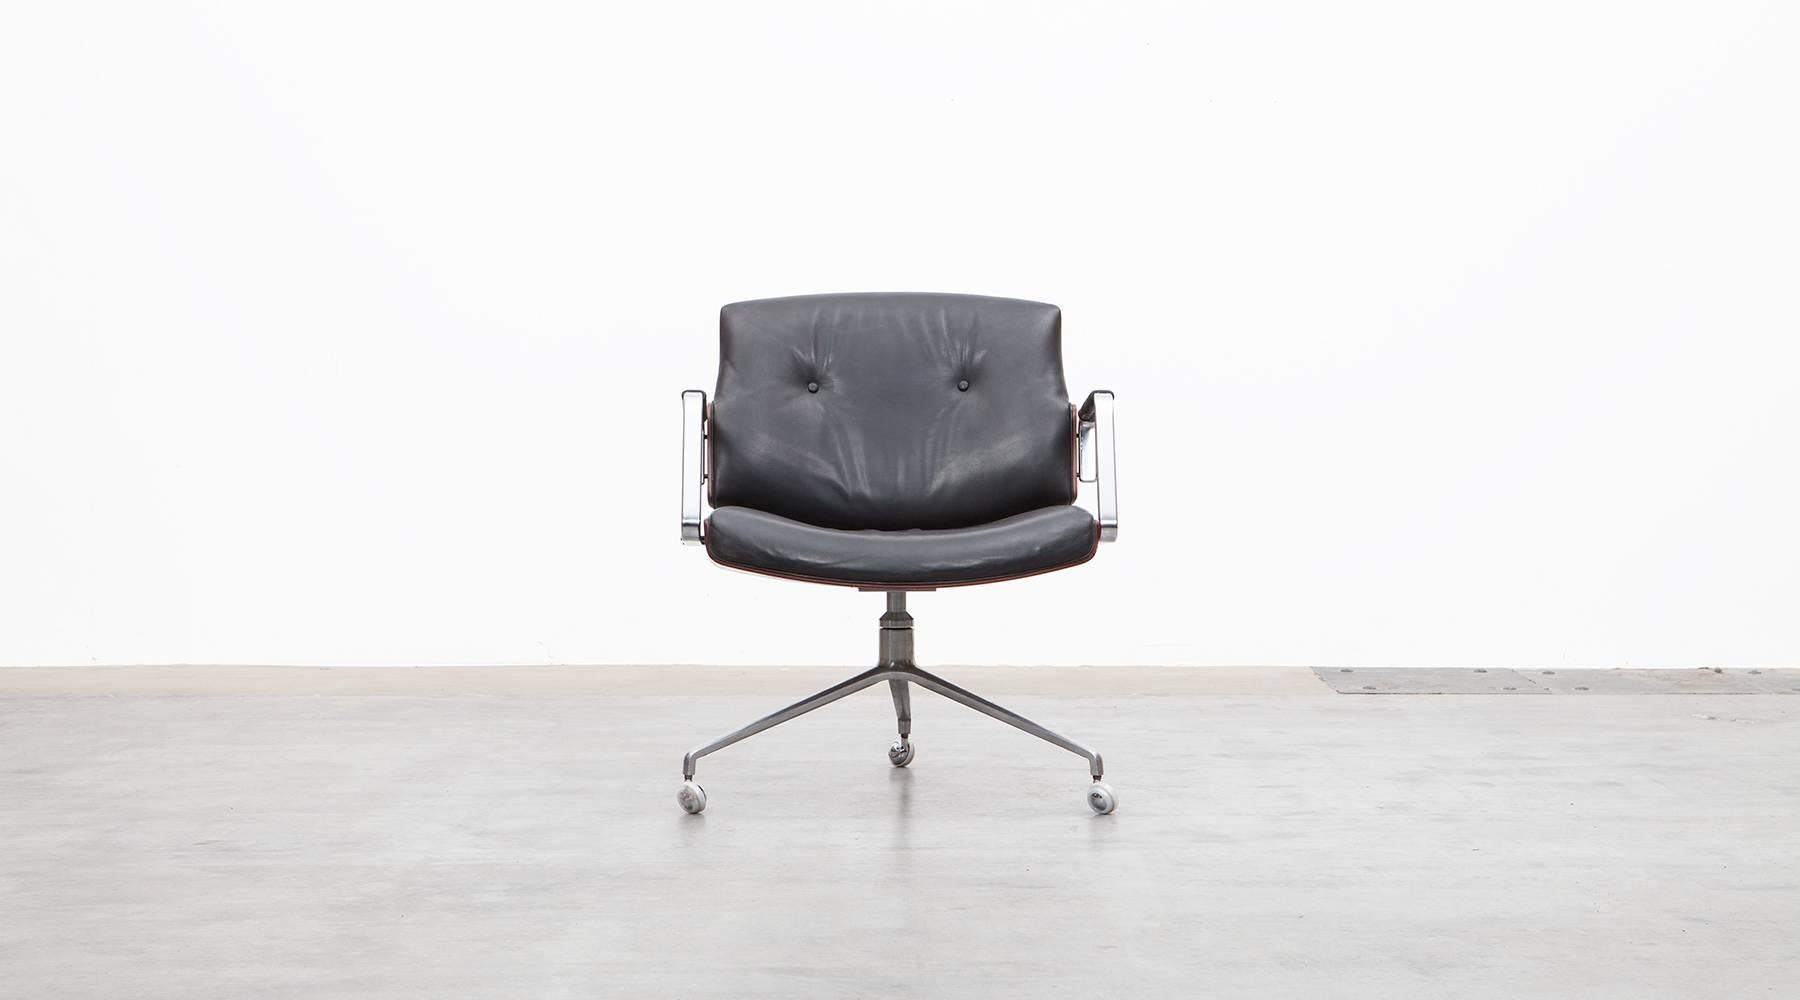 Black leather, Rosewood, Swivel Chair by Fabricius and Kastholm, Germany, 1968.

Classical swivel chairs designed by Preben Fabricius and Jørgen Kastholm. The chair has a brushed steel tripod foot, high quality-leather upholstery and two curved